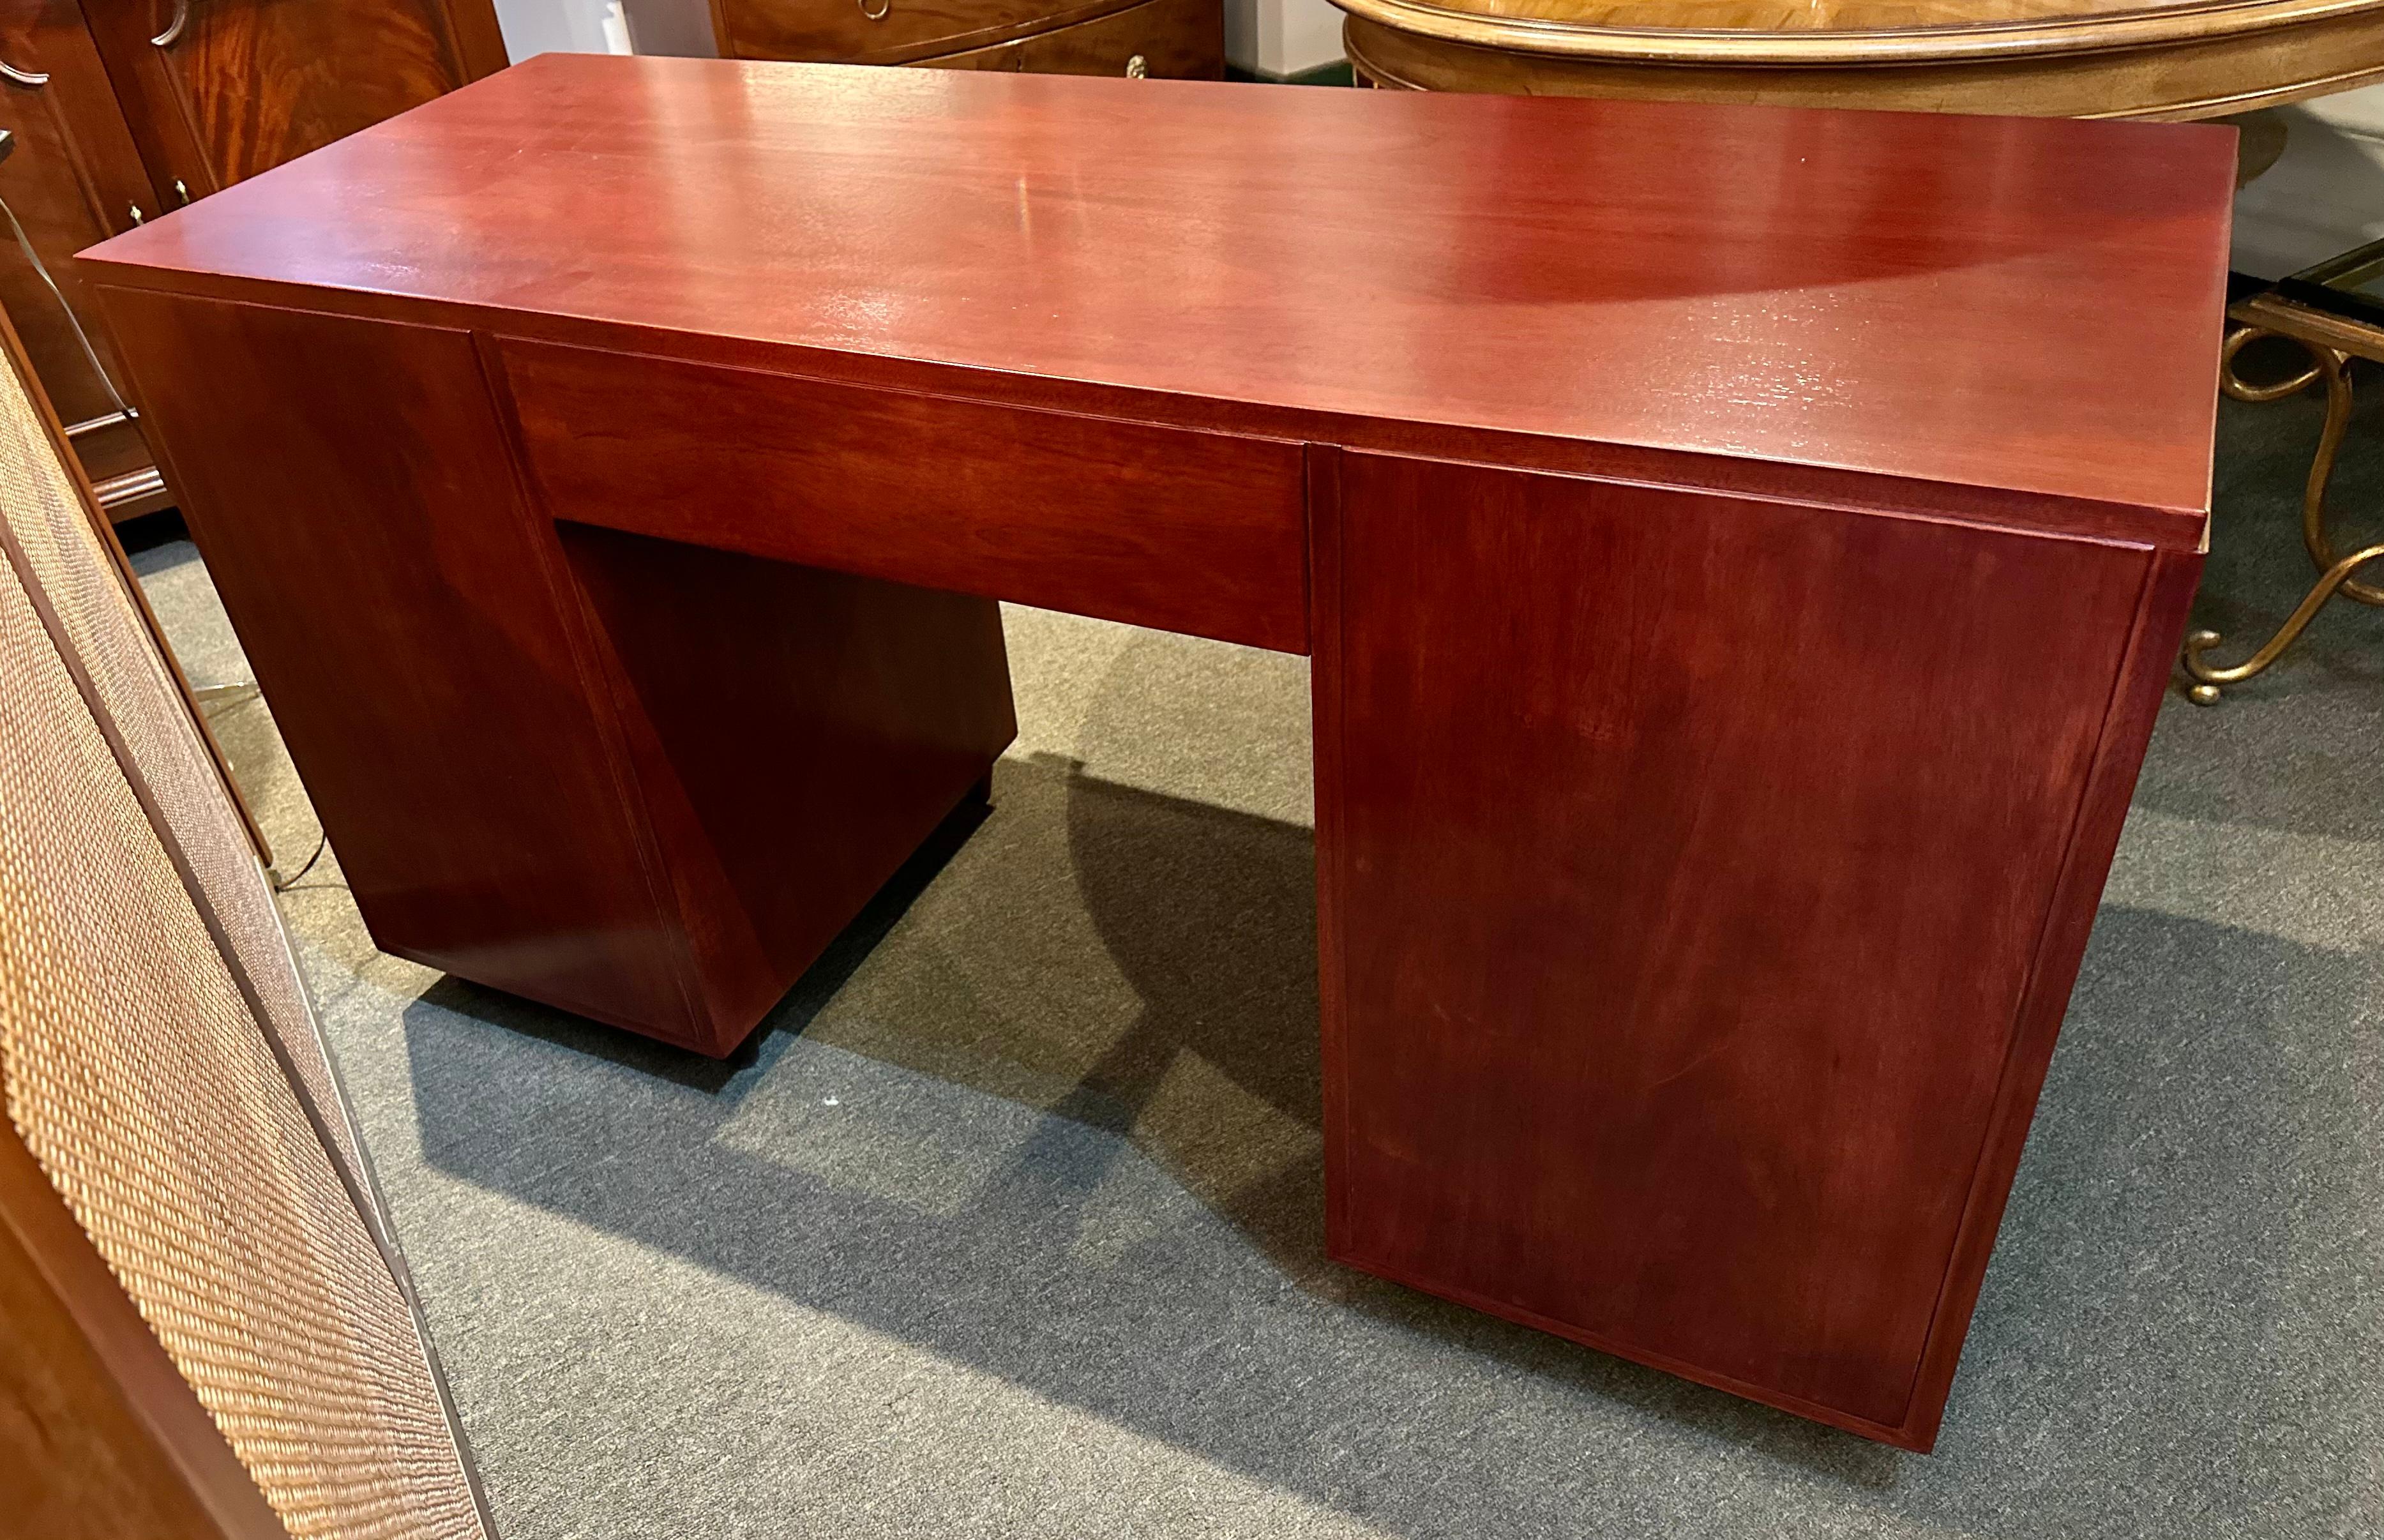 Mid-Century Modern Seldom seen Mahogany and Cork Desk by Paul Frankl for Johnson For Sale